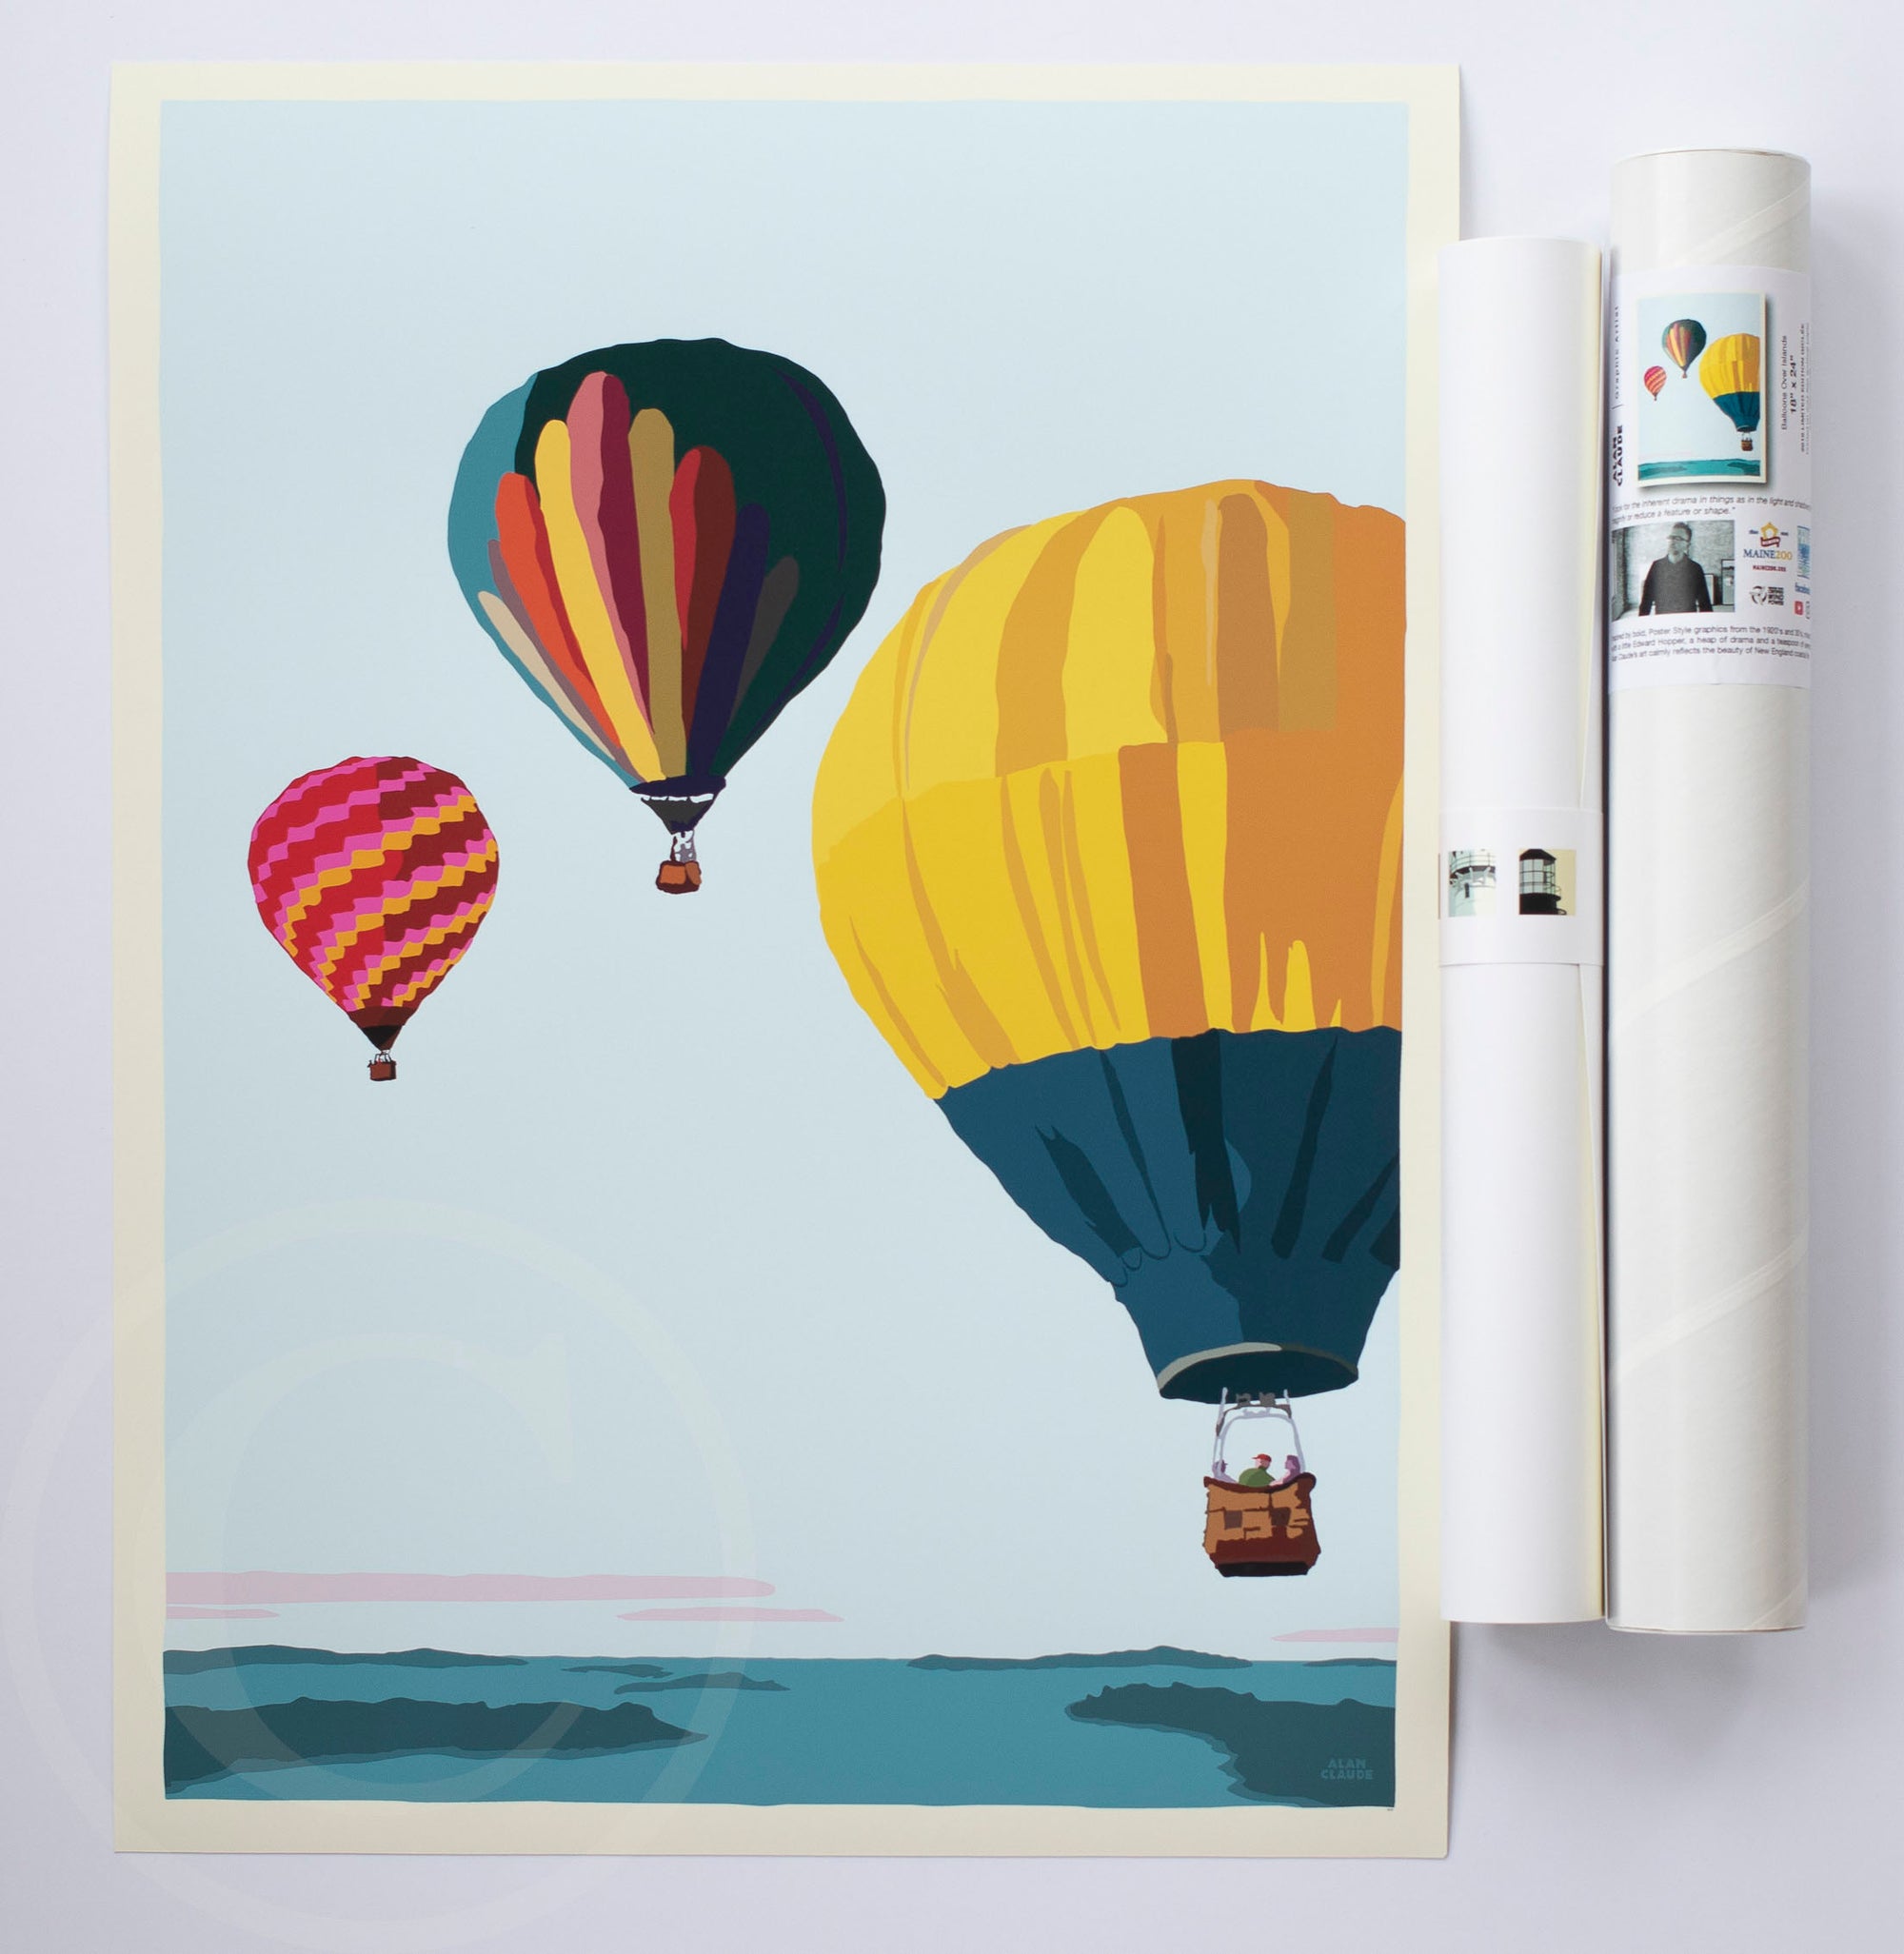 Balloons Over Islands Art Print 18" x 24" Wall Poster By Alan Claude - Maine